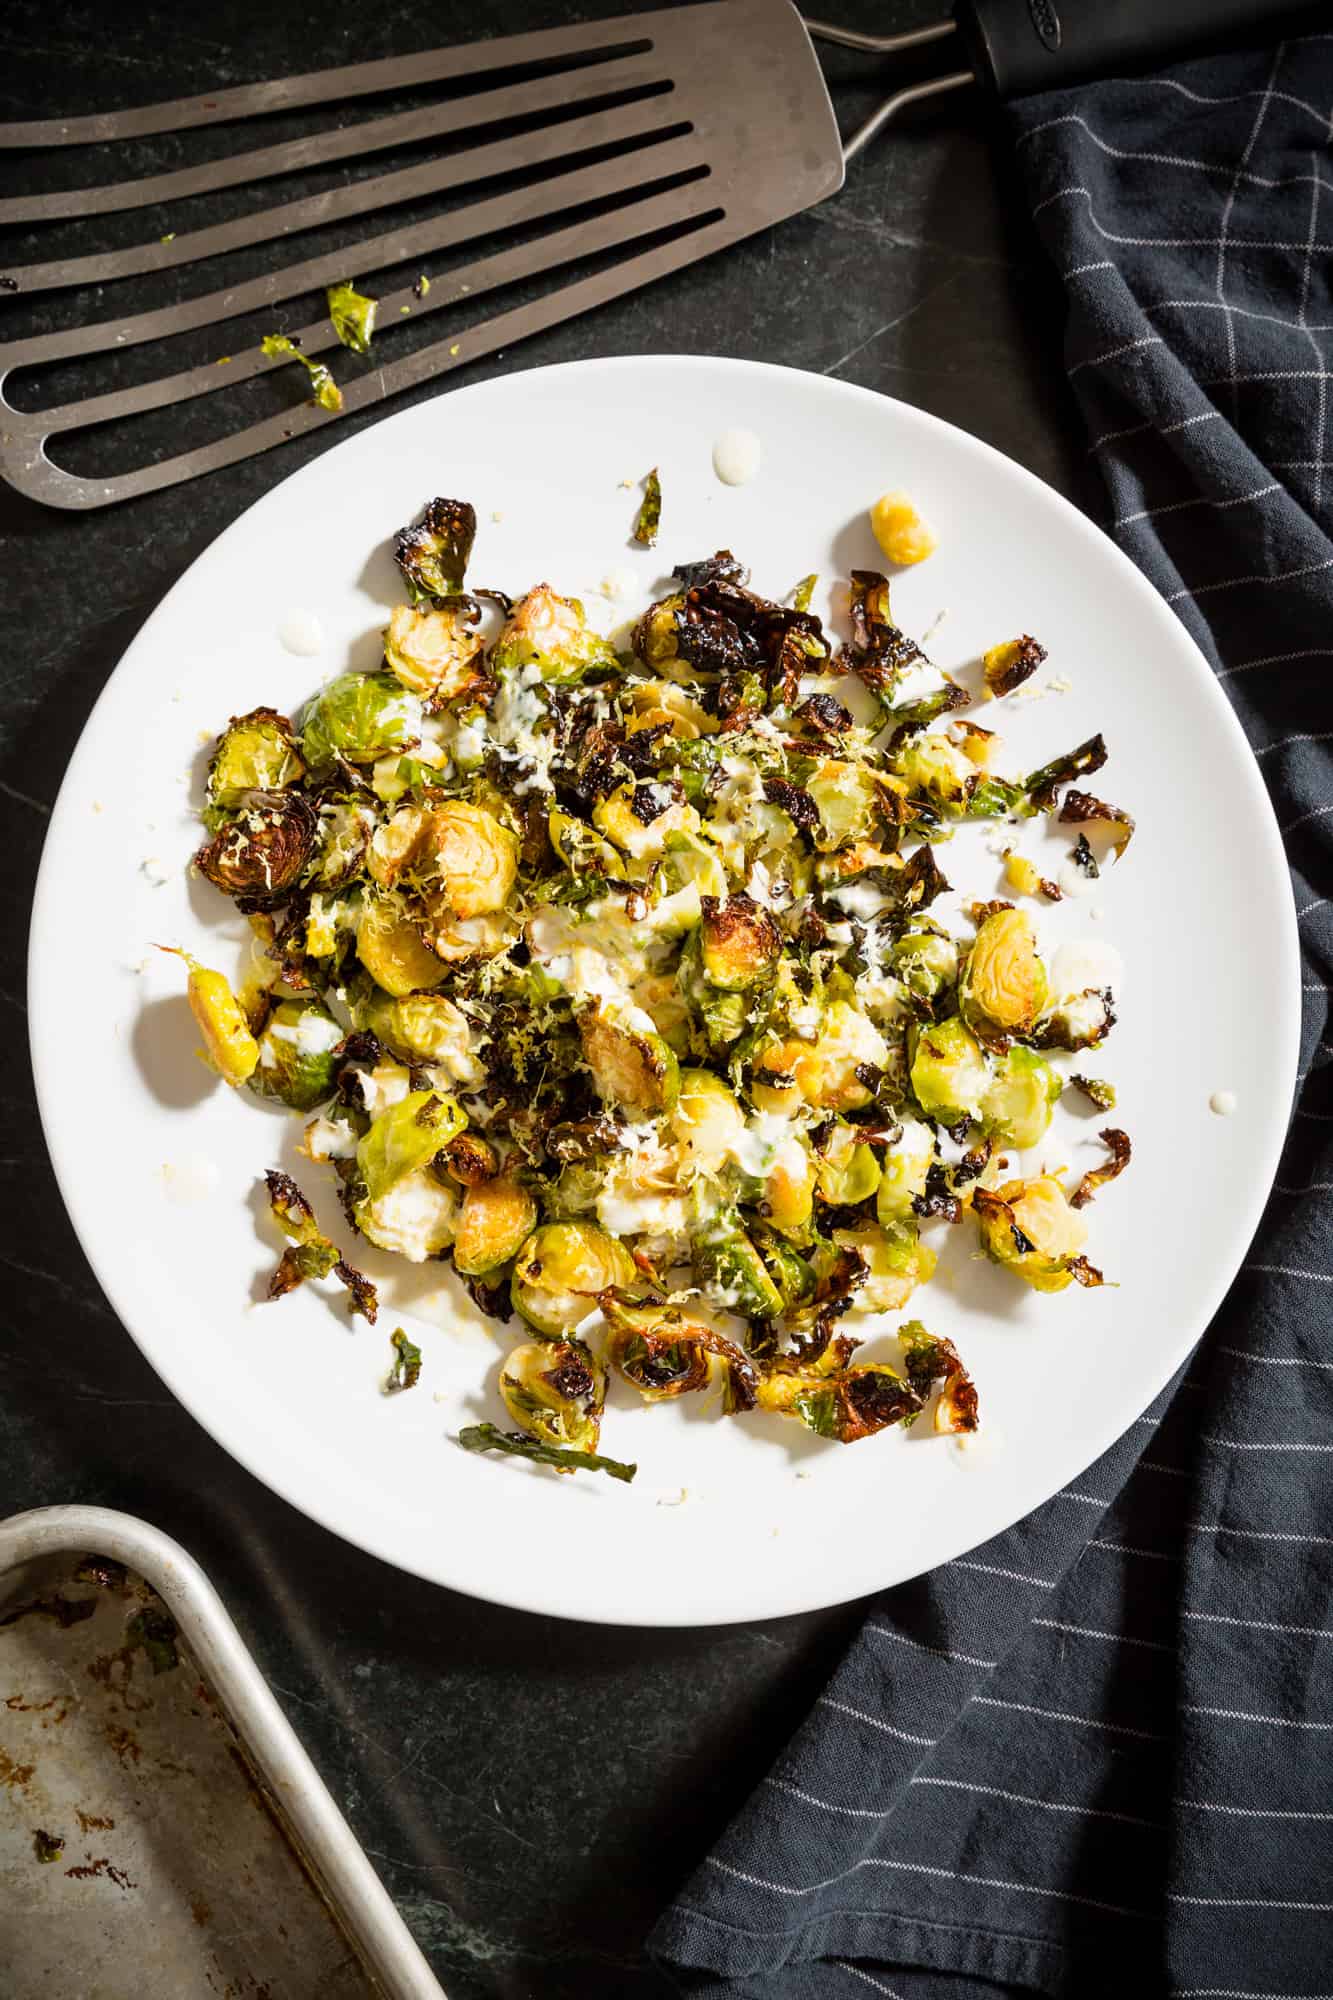 Roasted Brussel Sprouts with Lemon Aioli